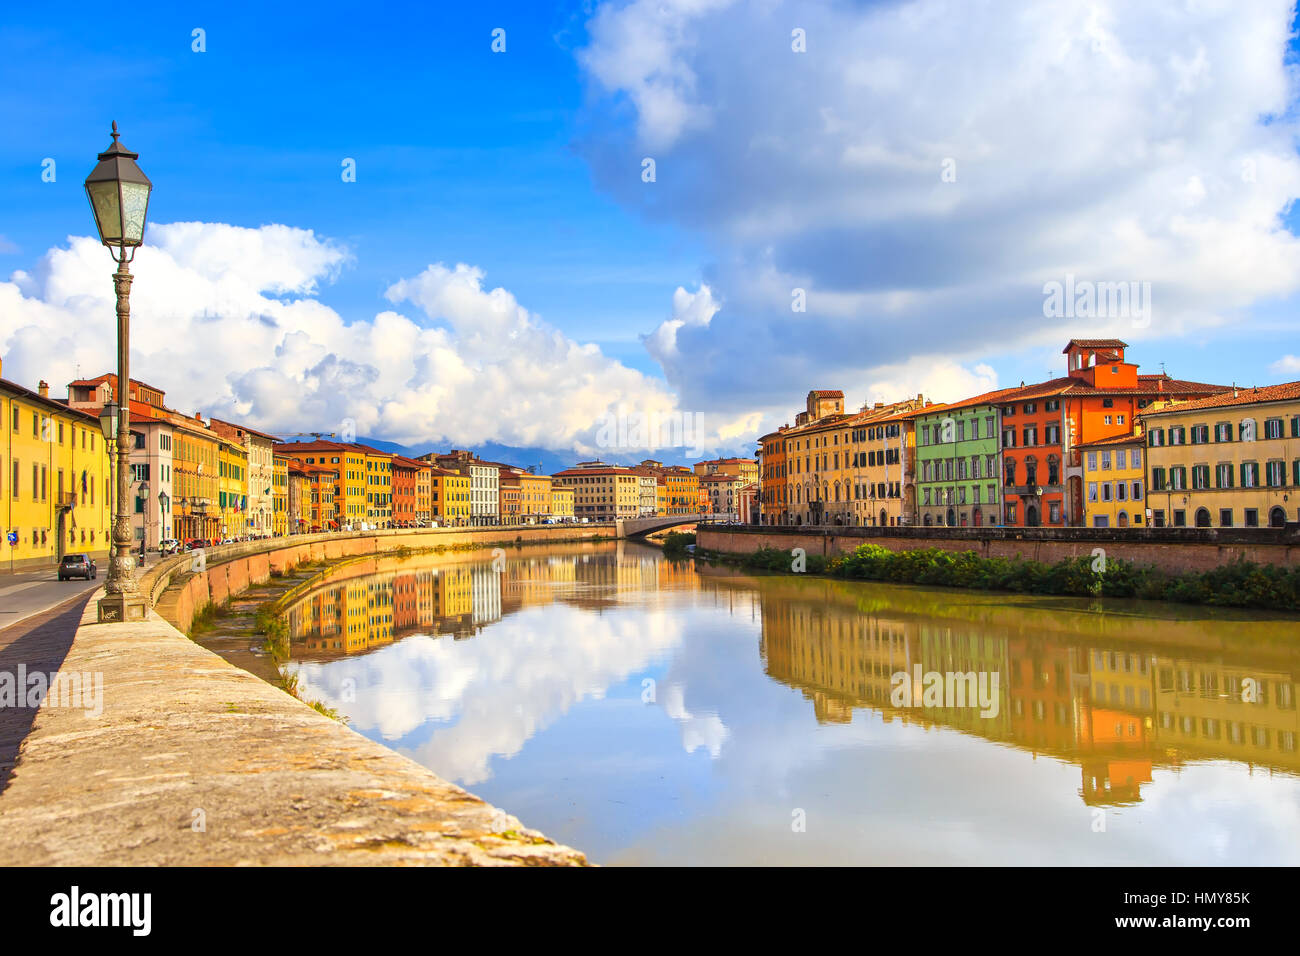 Pisa, Arno river, lamp and building facades reflection. Lungarno view. Tuscany, Italy, Europe. Stock Photo